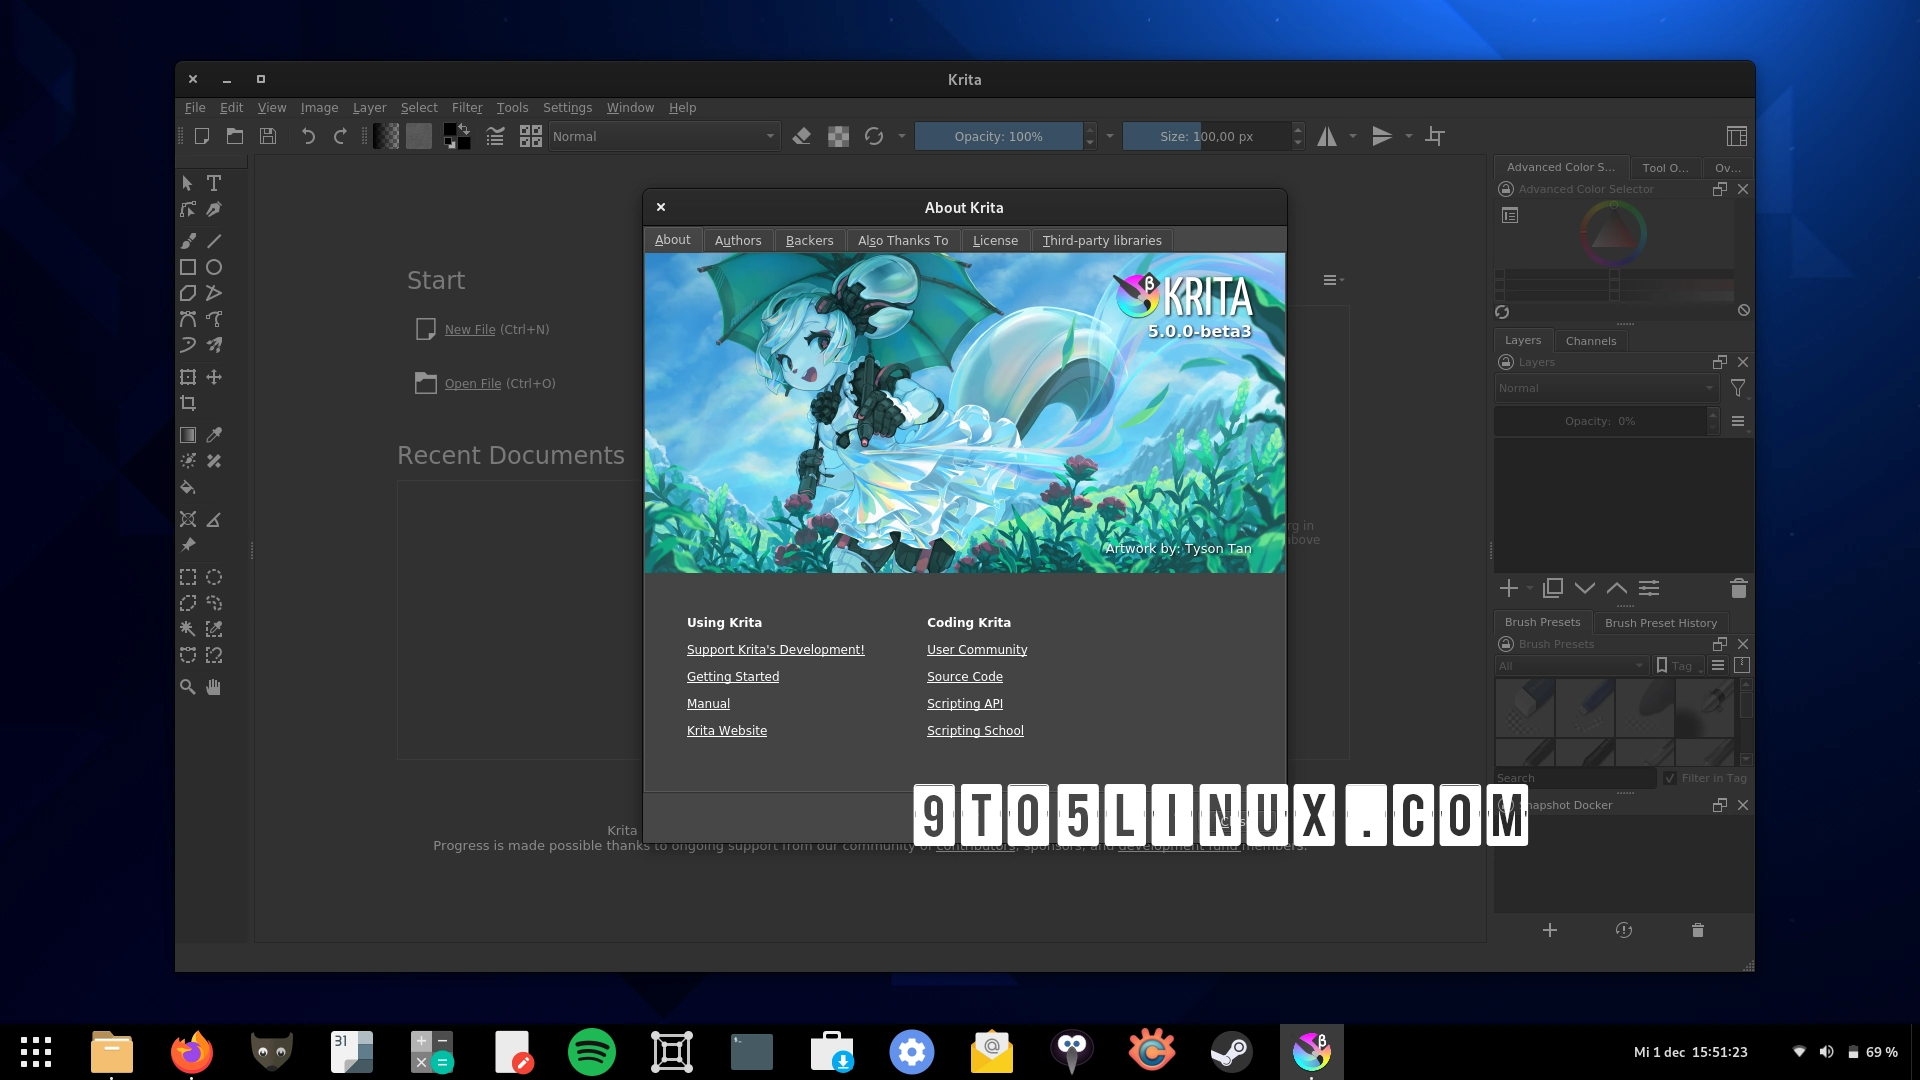 Krita 5.0 Arrives Just in Time for Christmas, New Beta Is Out Now for Public Testing